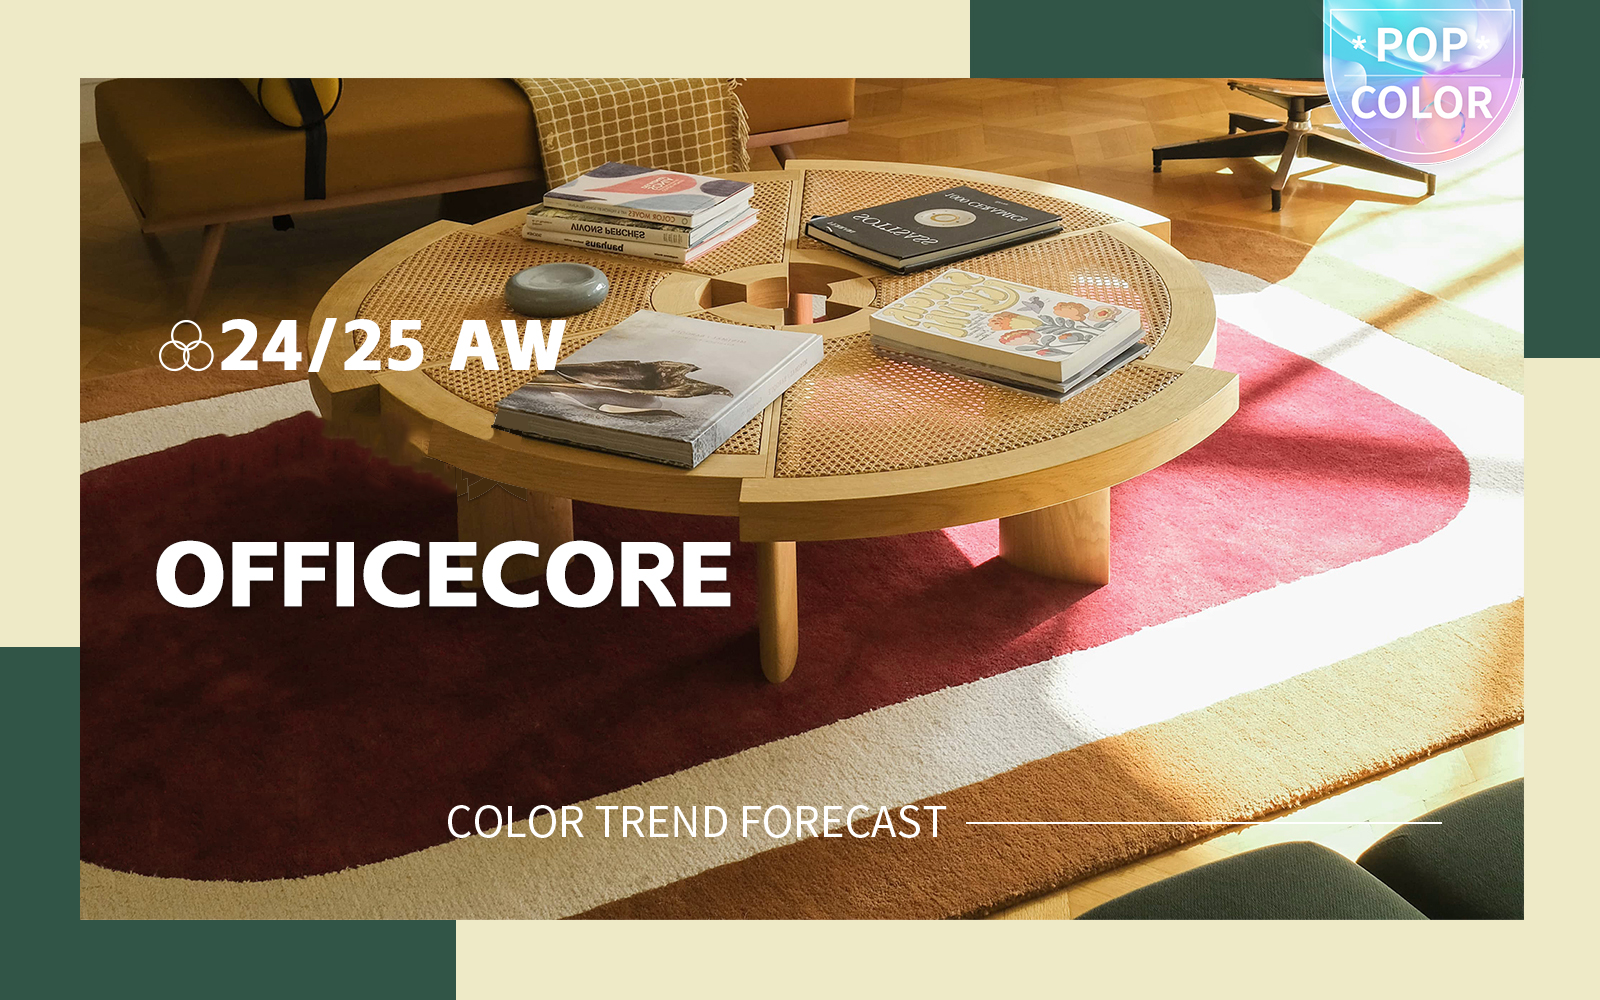 Officecore -- A/W 24/25 Color Trend Forecast